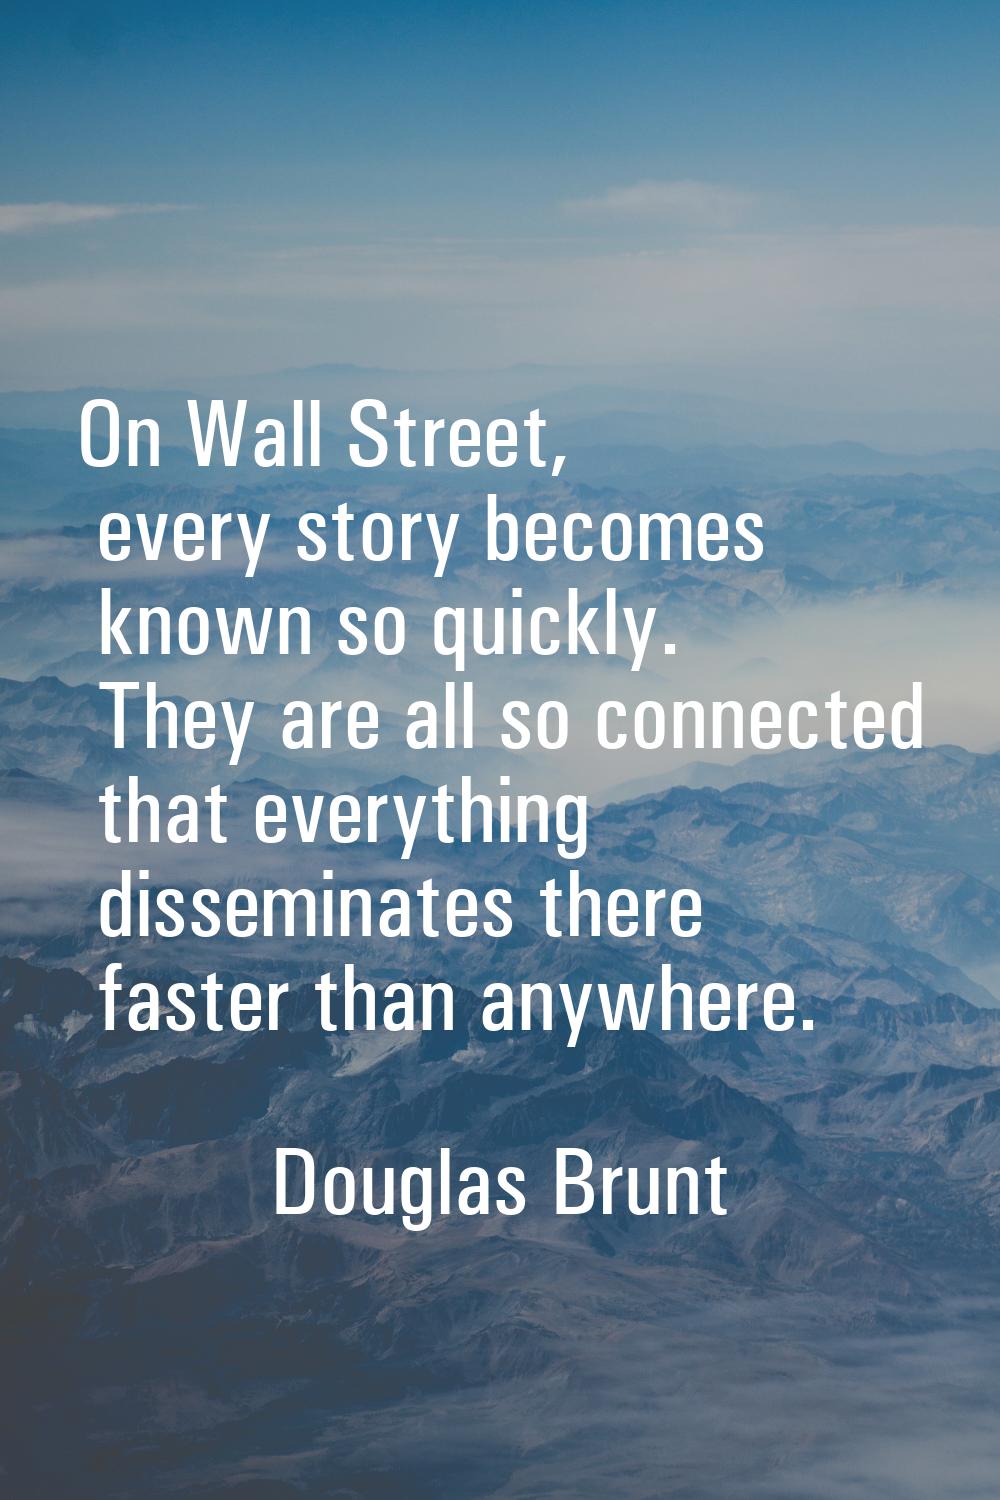 On Wall Street, every story becomes known so quickly. They are all so connected that everything dis